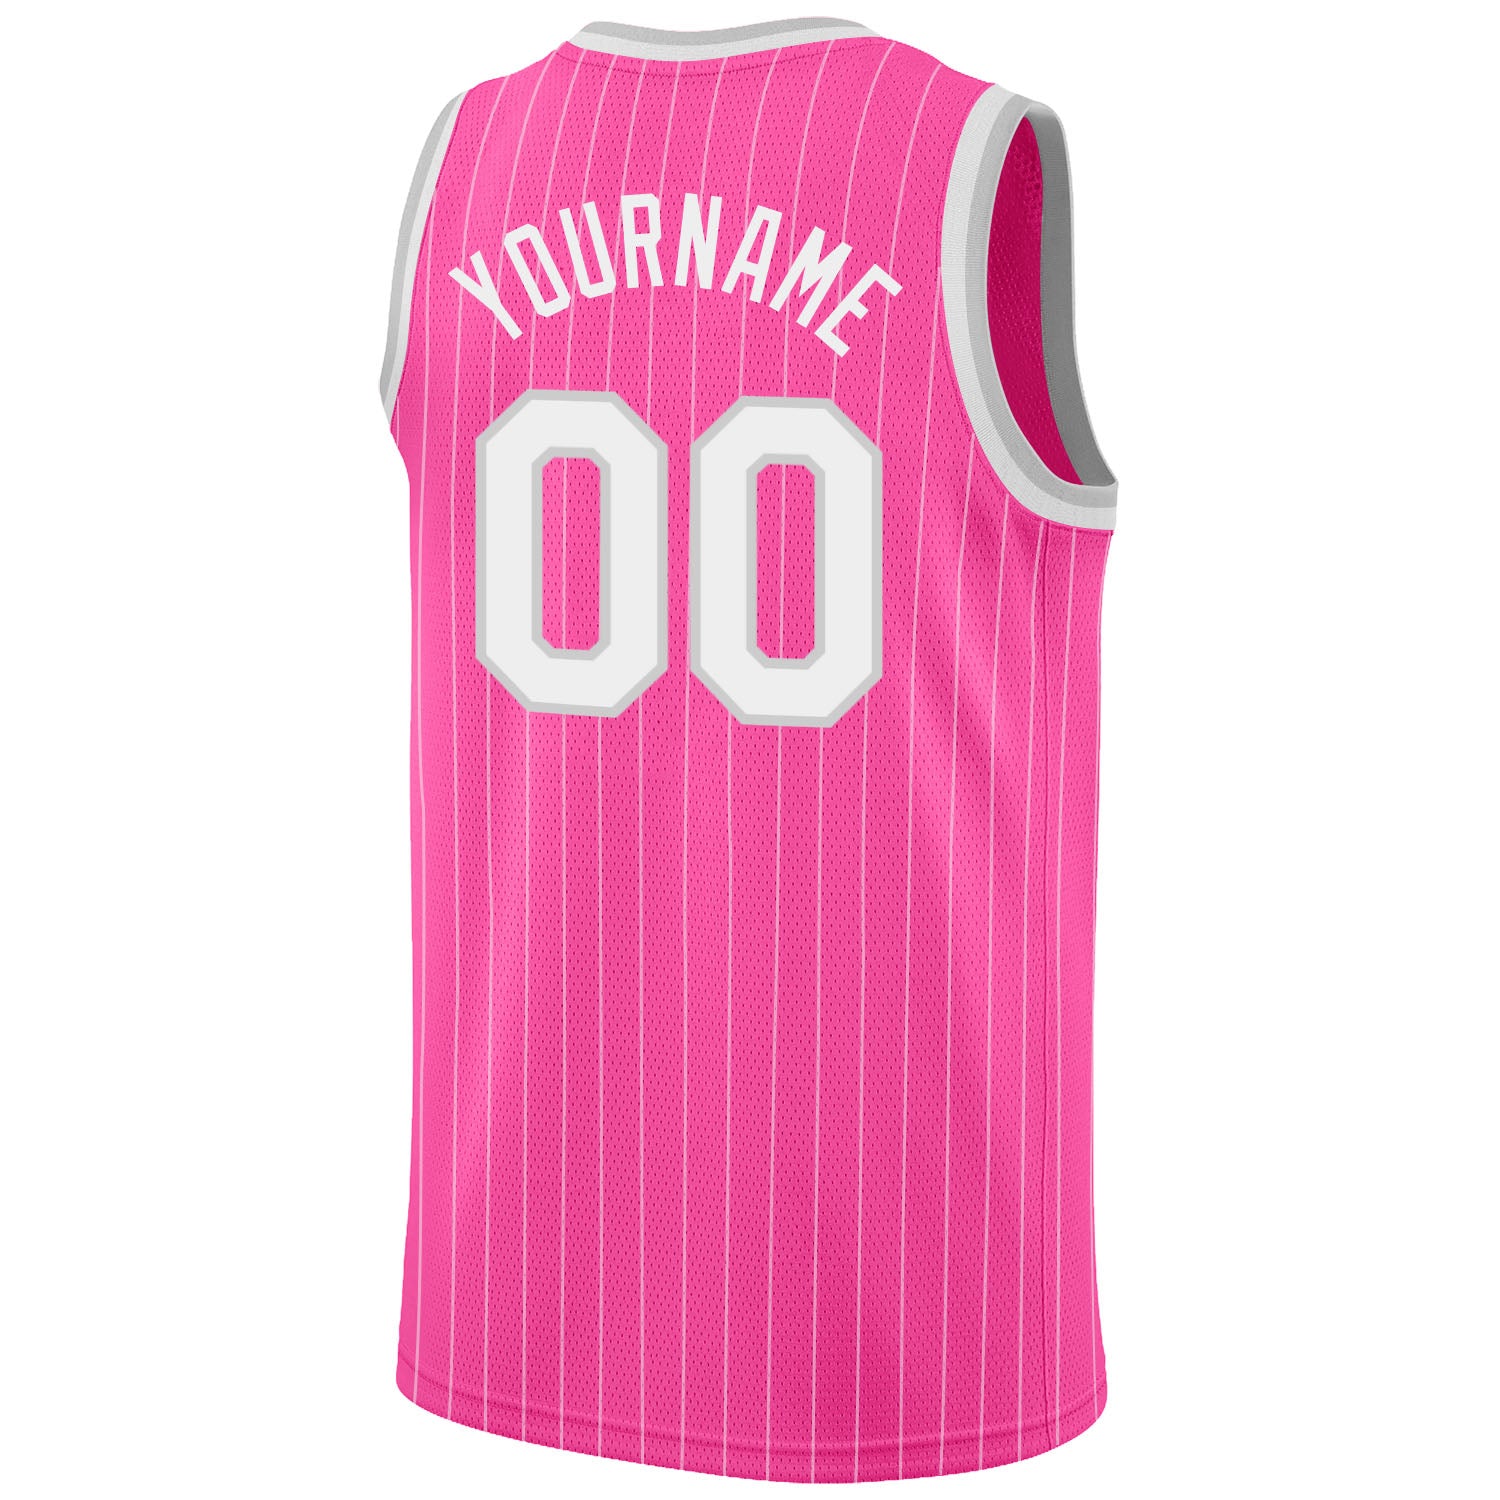 Custom pink basketball jersey number iPhone case